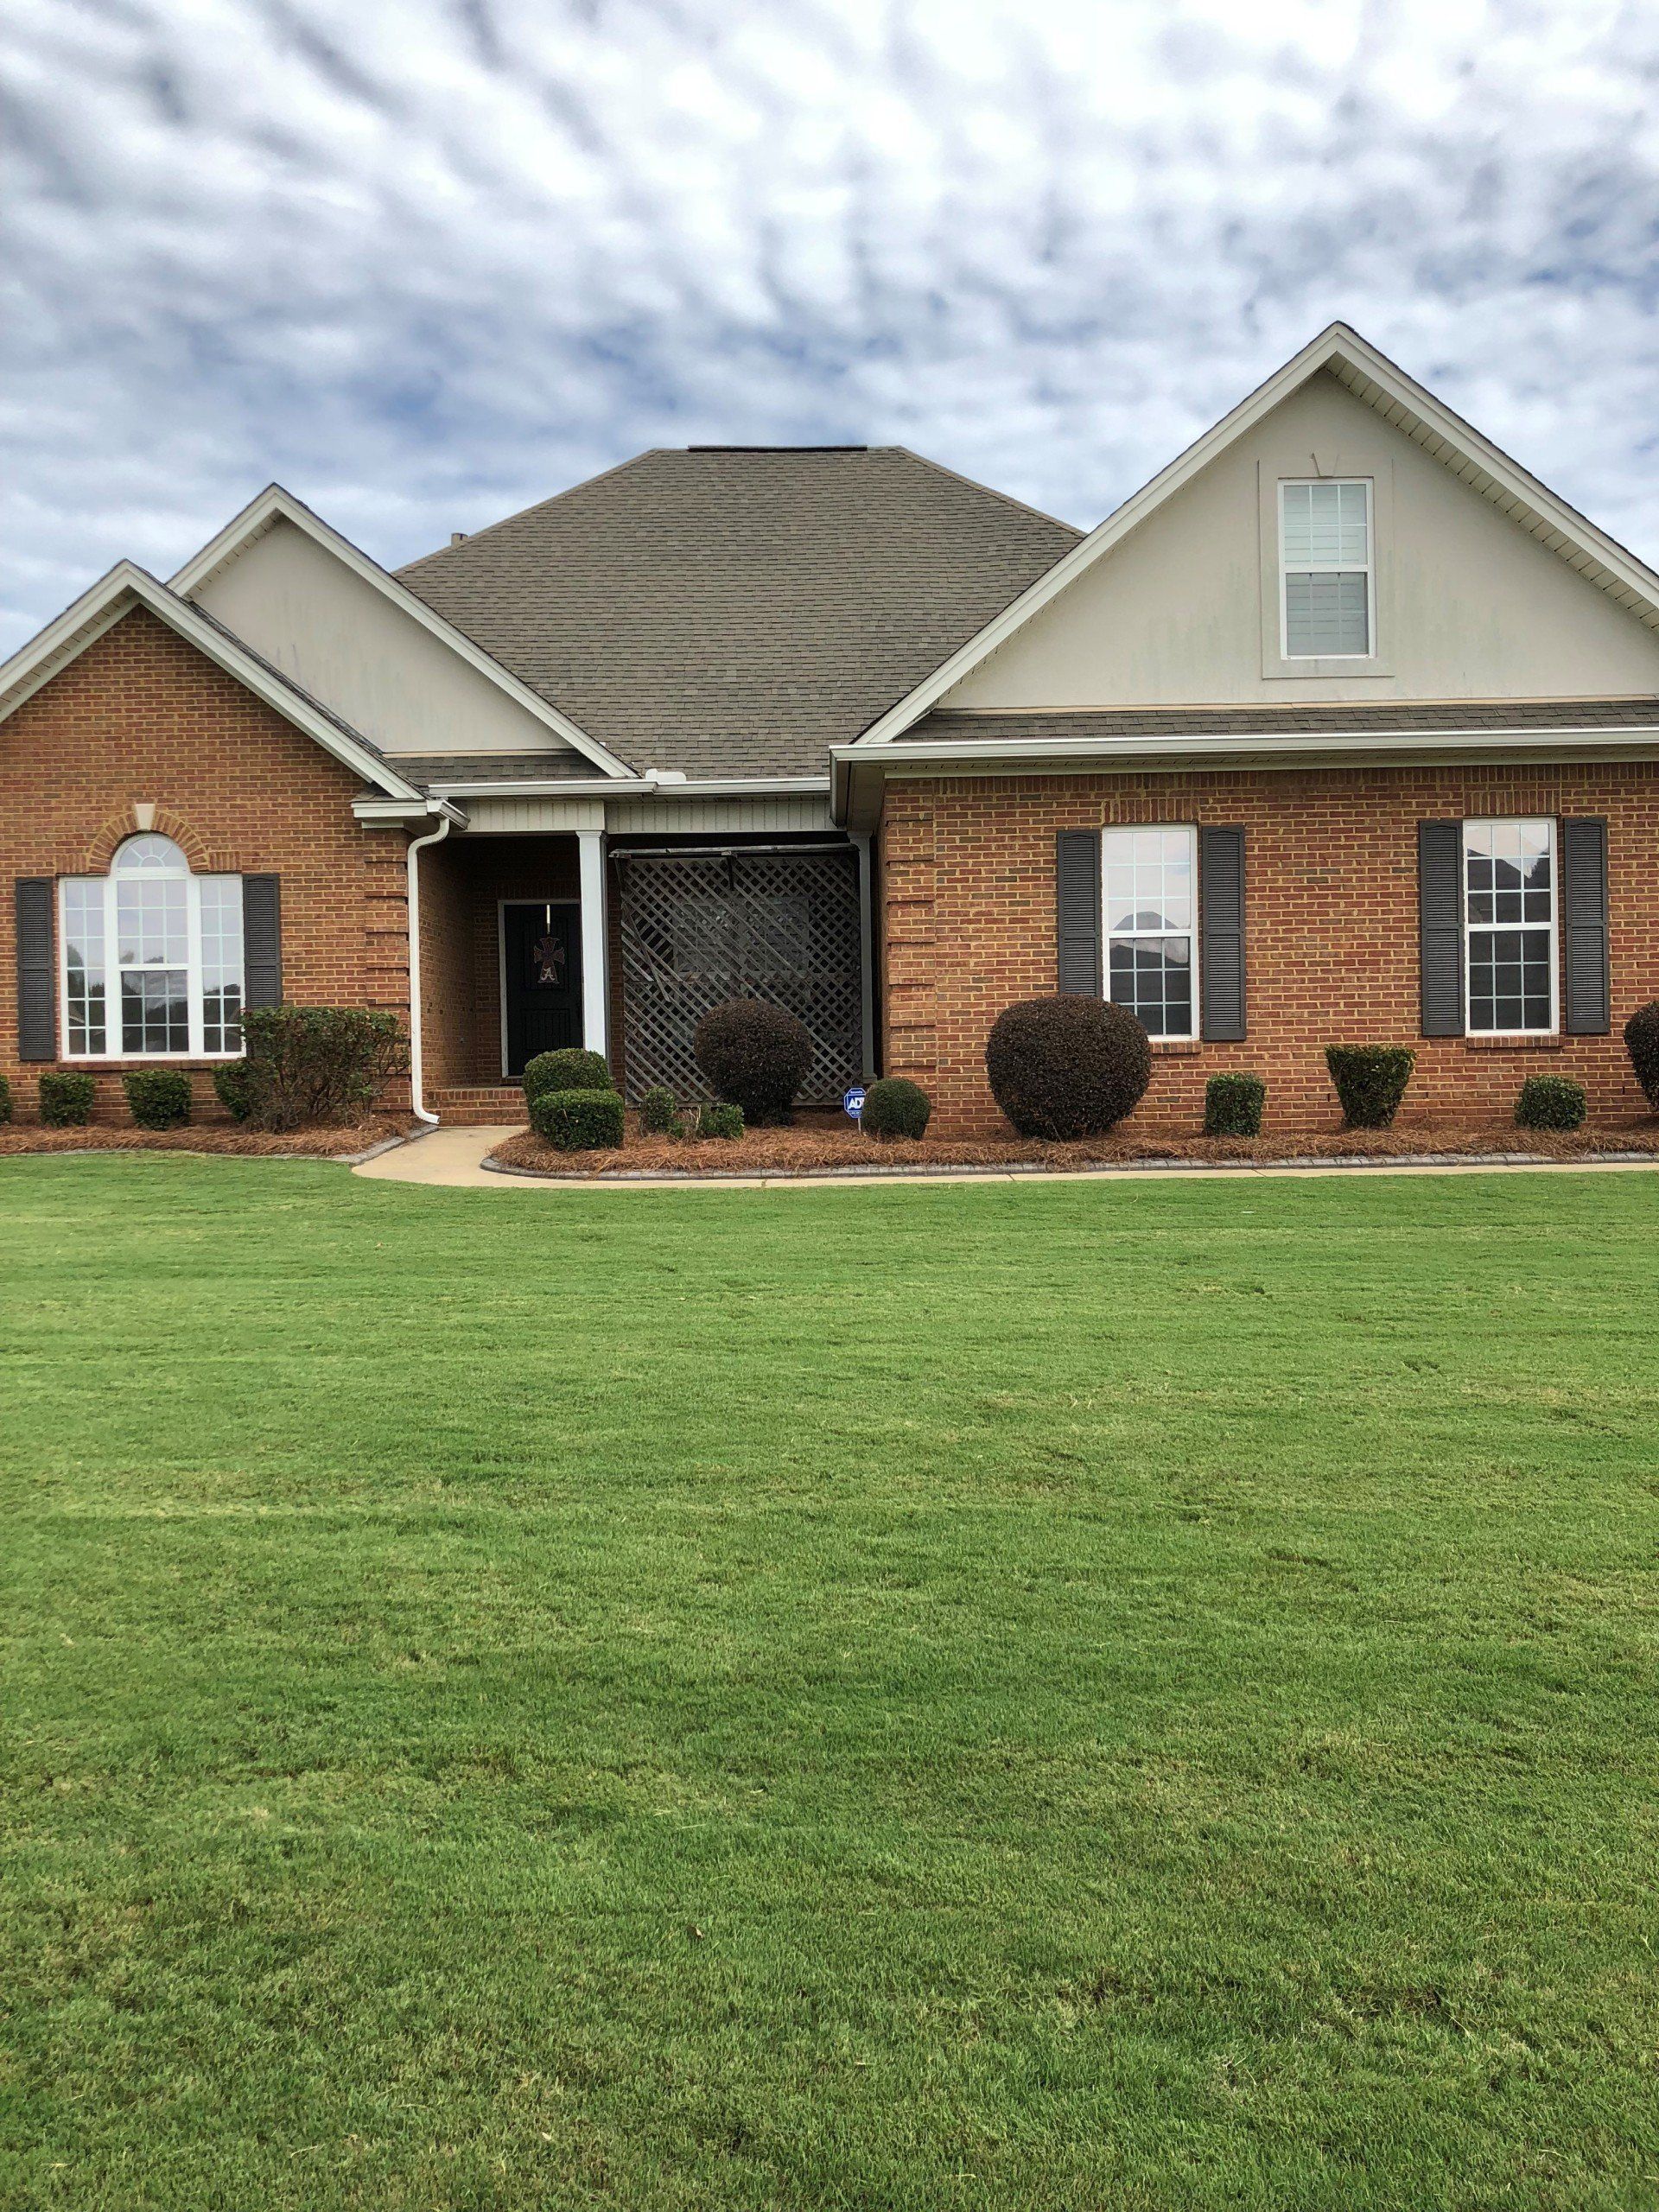 AFTER Home Window Tint Installed - SPF Tinting Prattville, AL